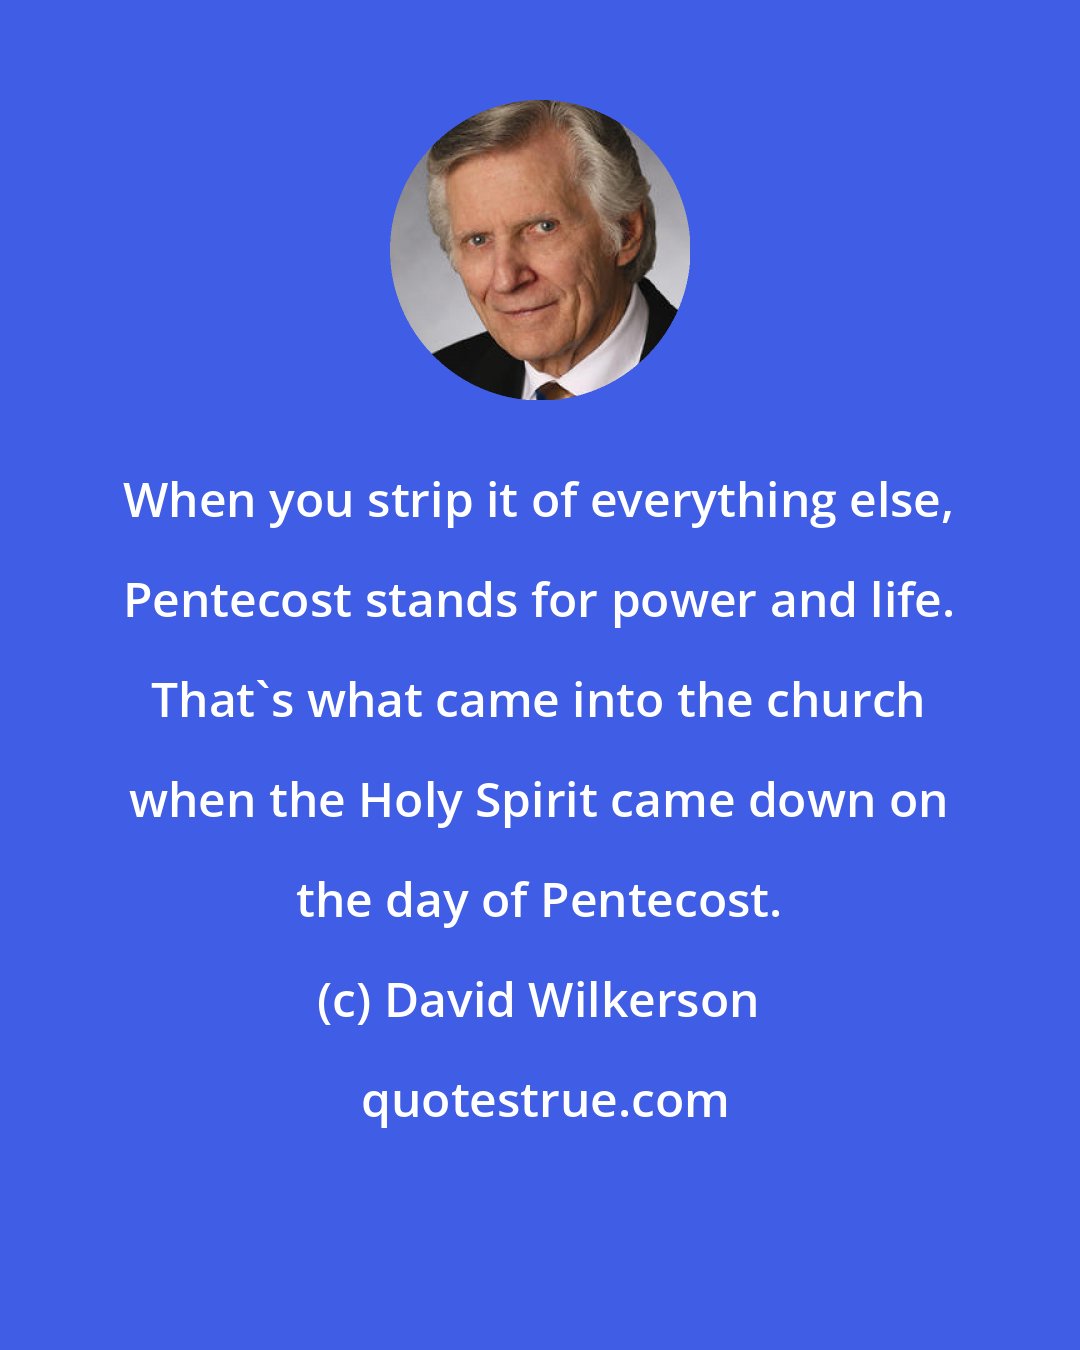 David Wilkerson: When you strip it of everything else, Pentecost stands for power and life. That's what came into the church when the Holy Spirit came down on the day of Pentecost.